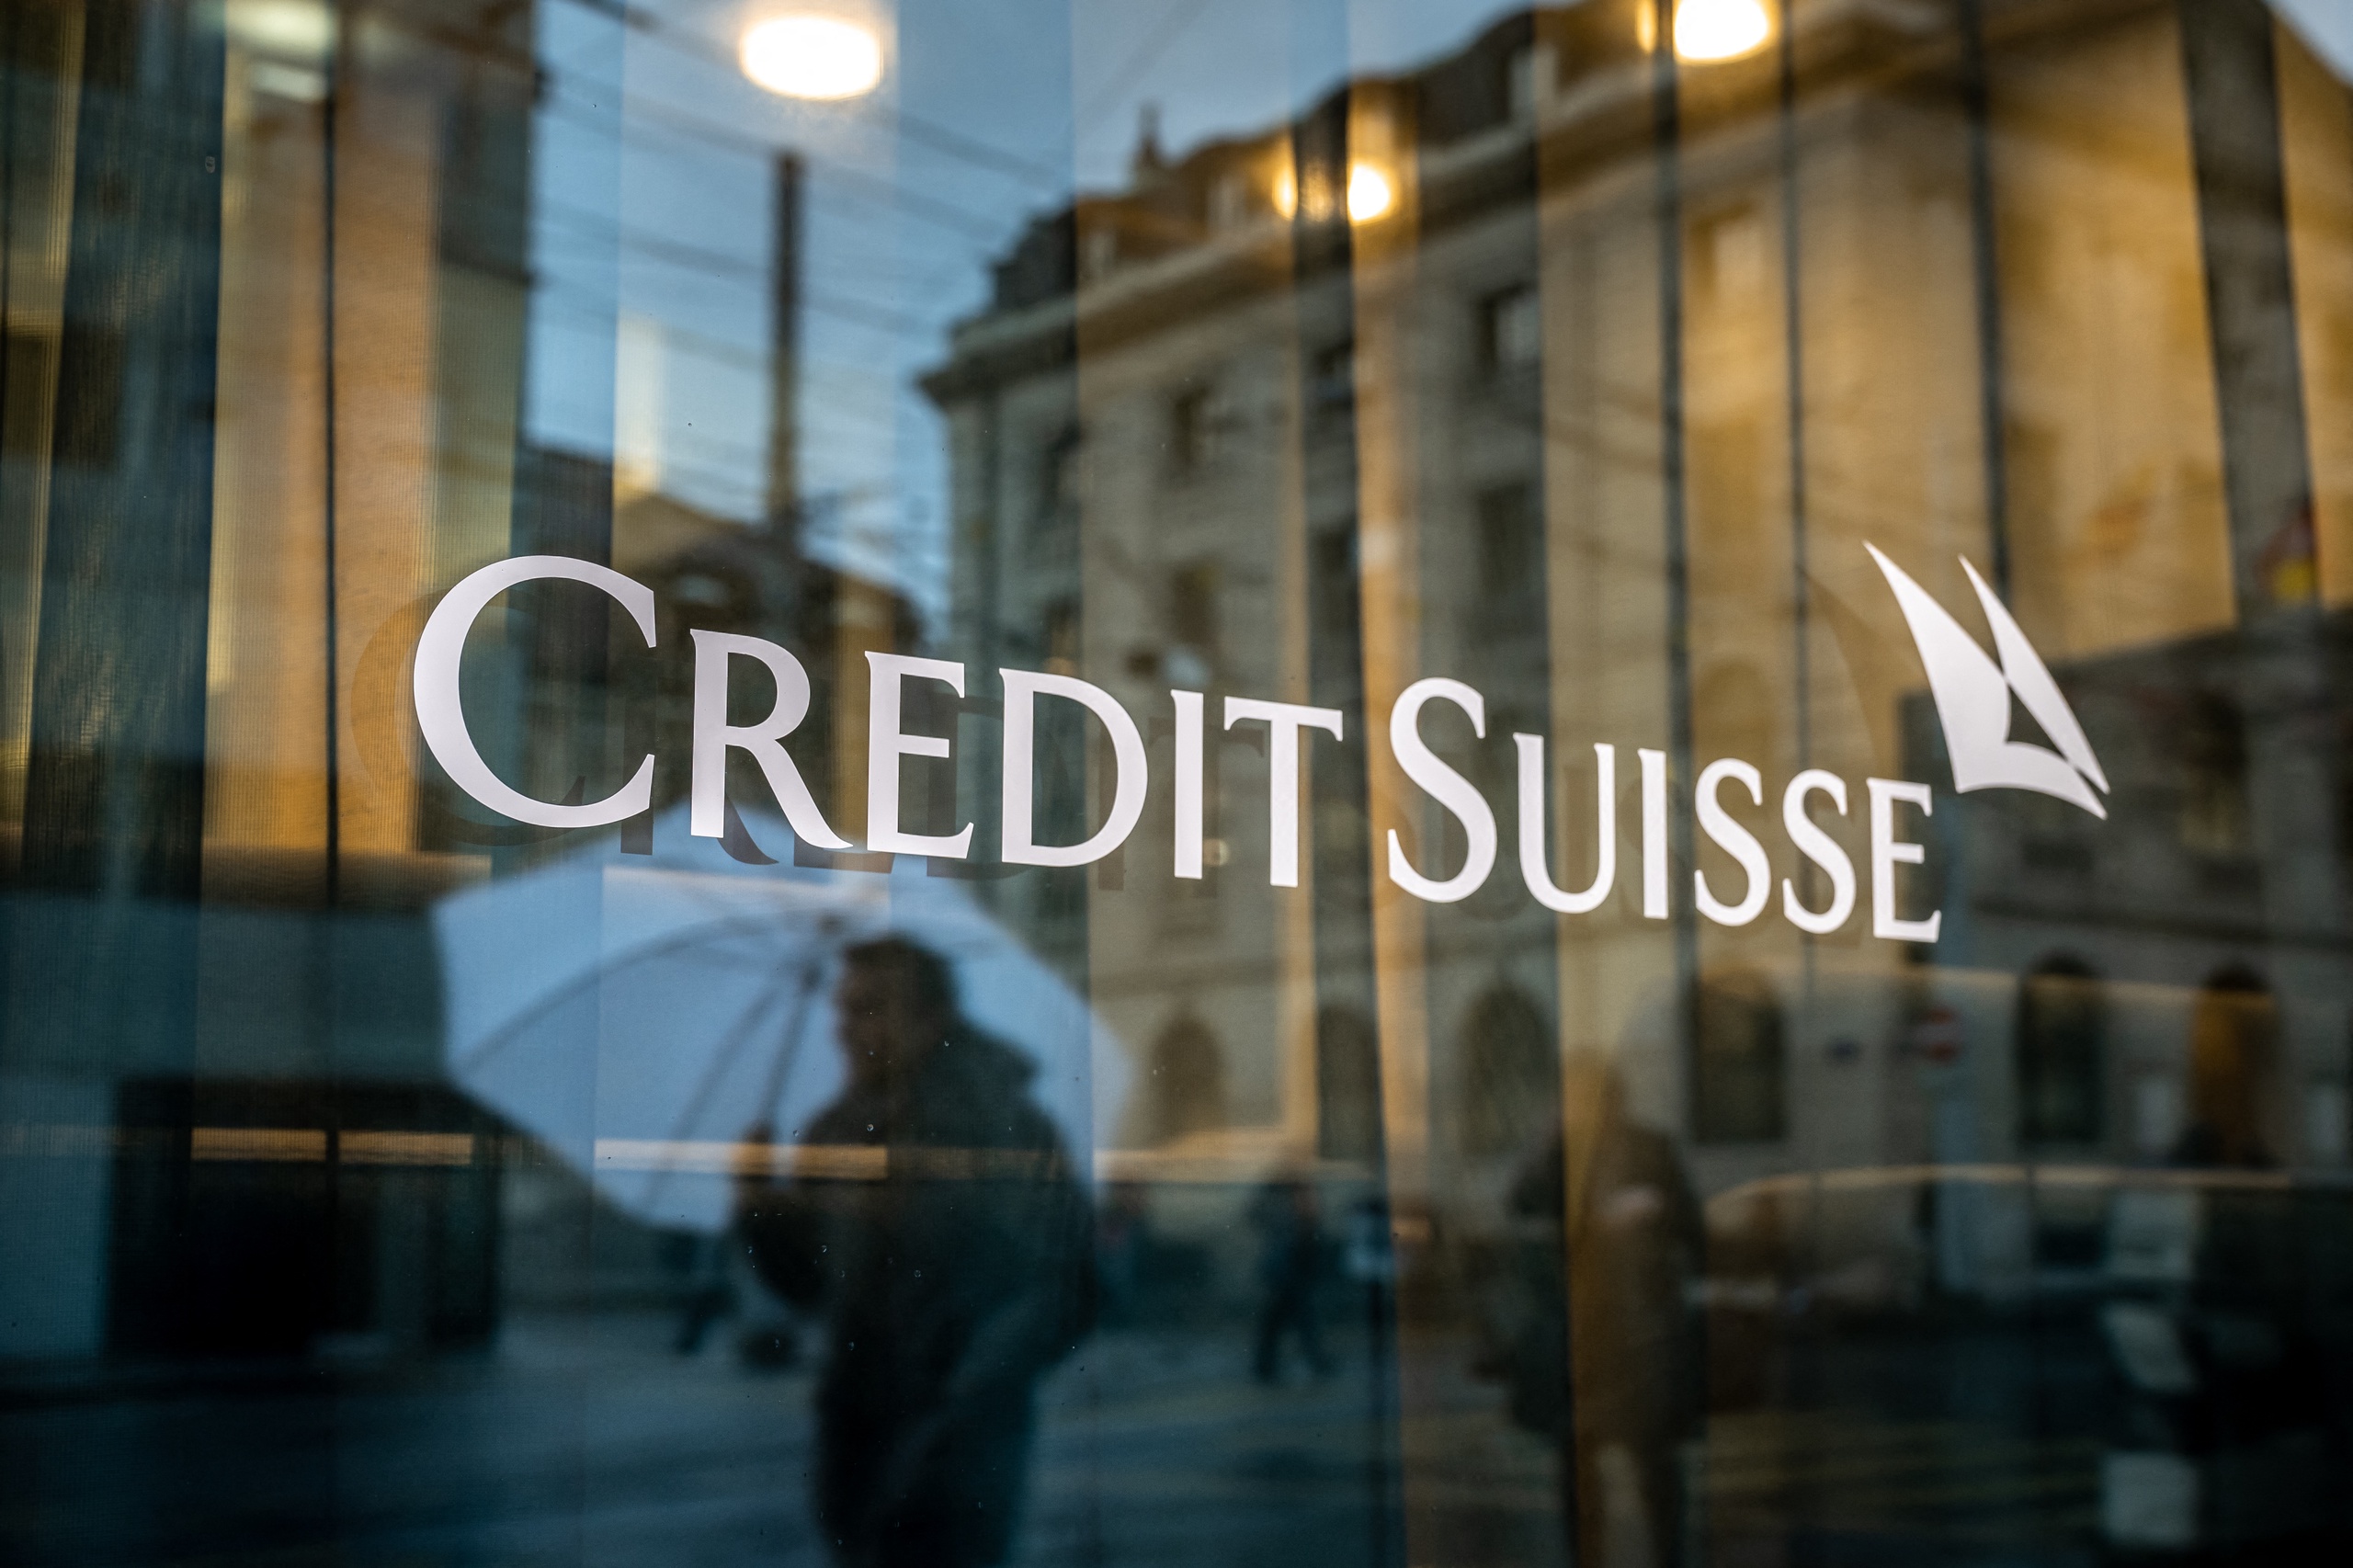 The Swiss government really had no choice but to take over Credit Suisse Group AG because the bank could not have survived another day.  This was said by Swiss Finance Minister Karin-Keller Sutter, according to Bloomberg.